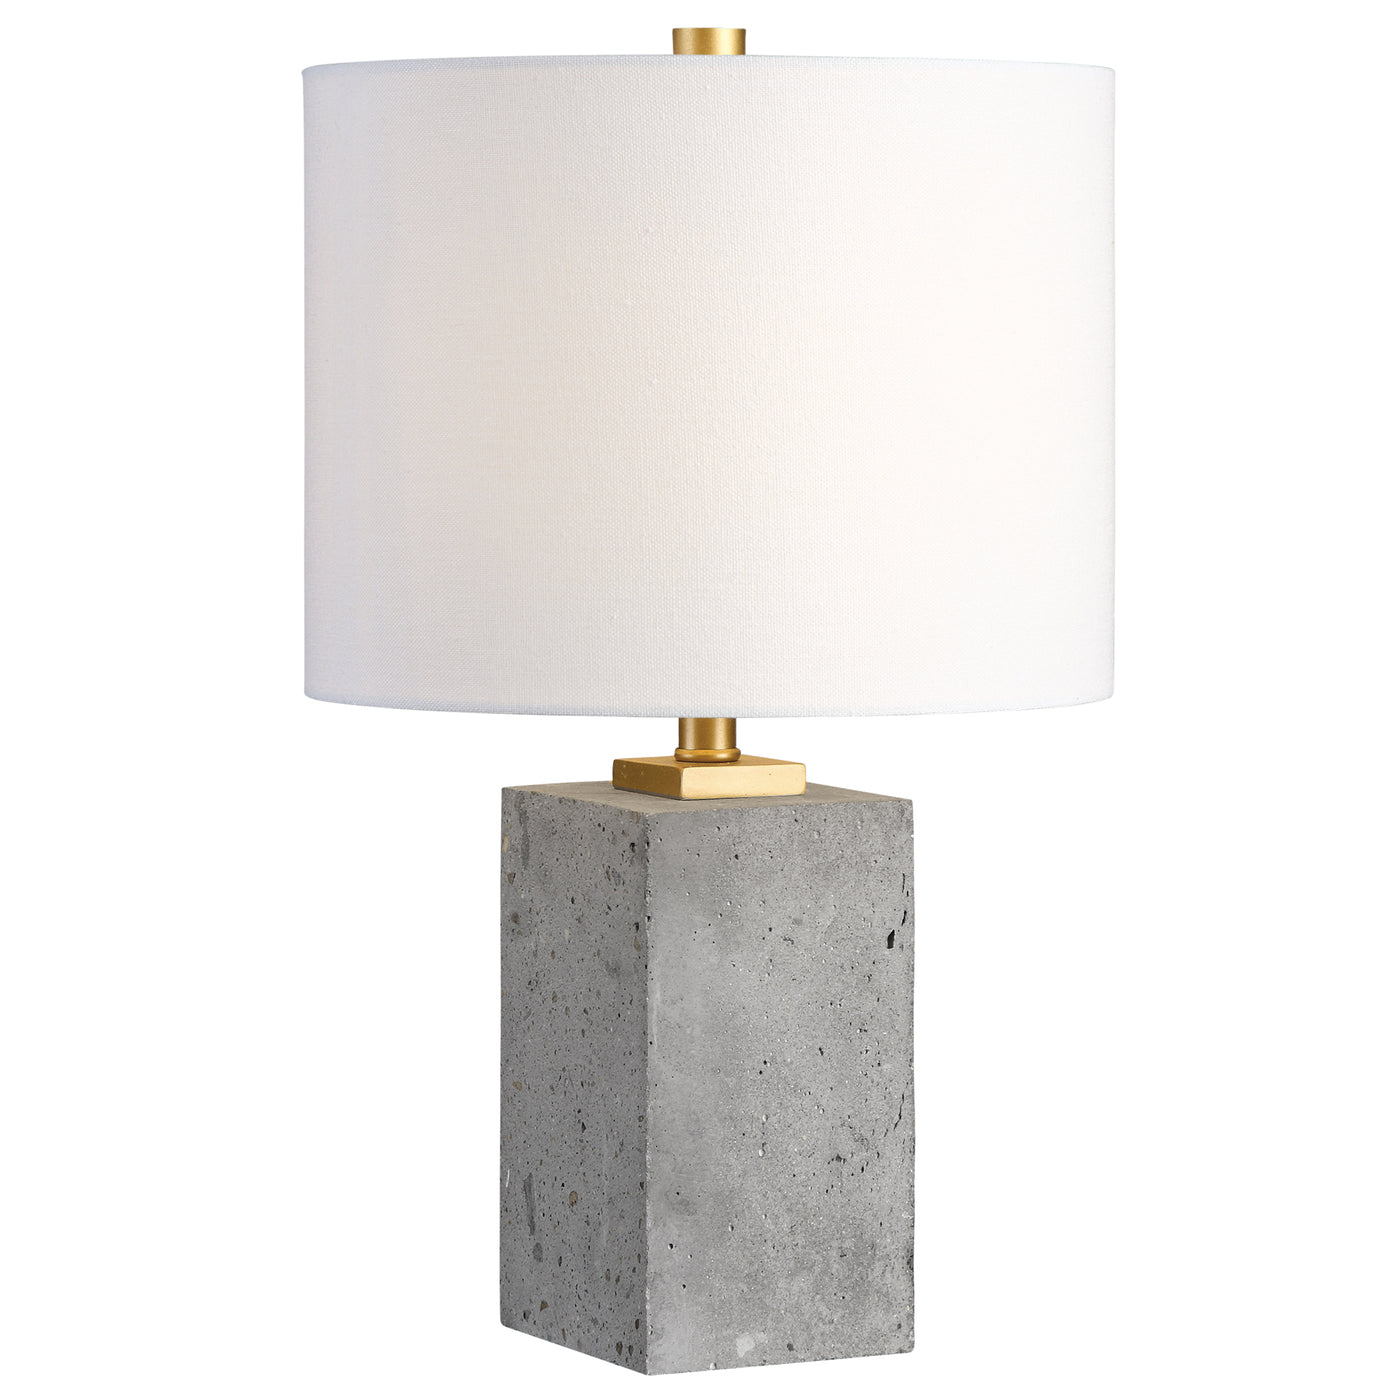 Thick Block Of Porous, Lightly Stained Concrete Accented With Brushed Gold Painted Details. The Round Hardback Drum Shade ...